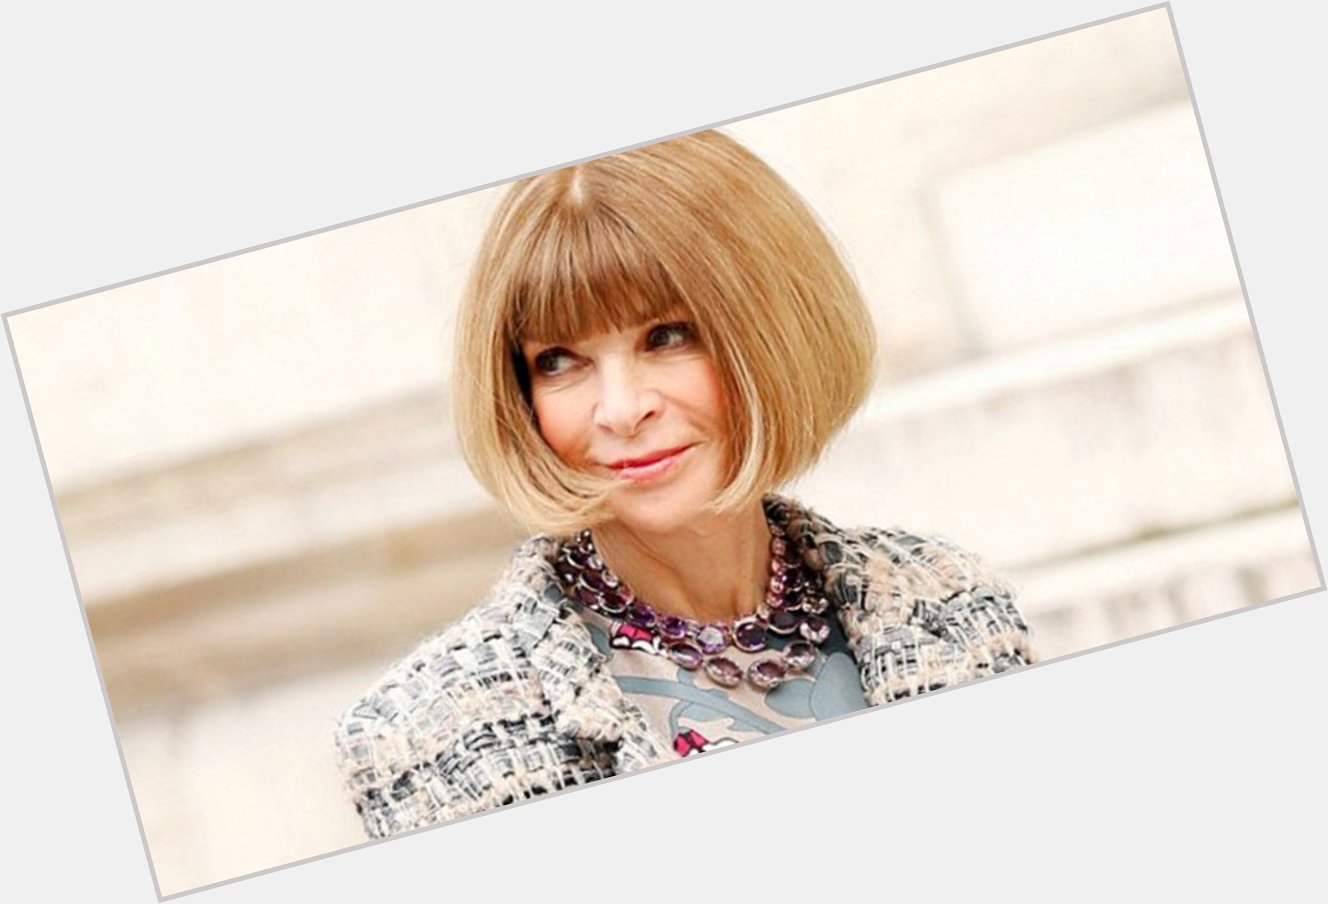 Happy birthday Anna Wintour! We can\t wait to wake up each morning just like you do:  